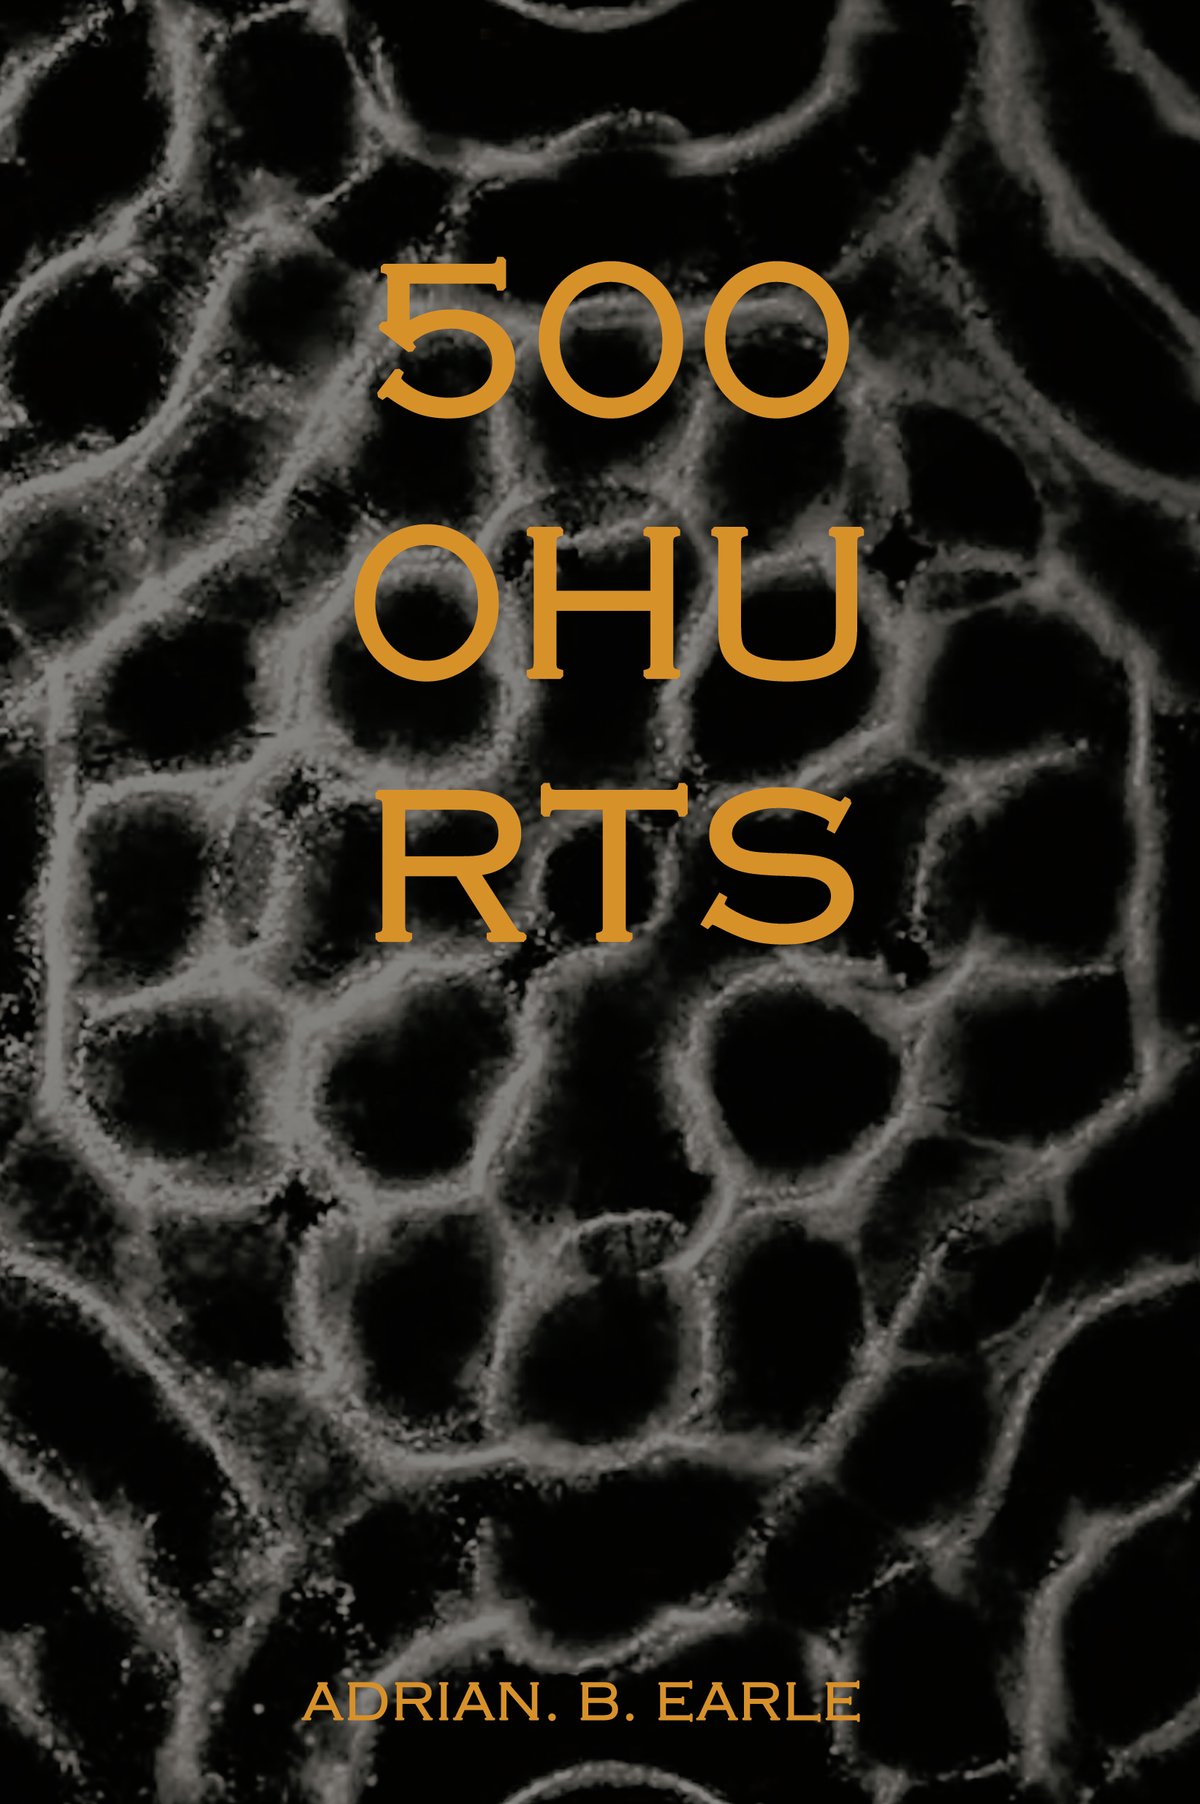 Image of 5000 HURTS by Adrian. B. Earle